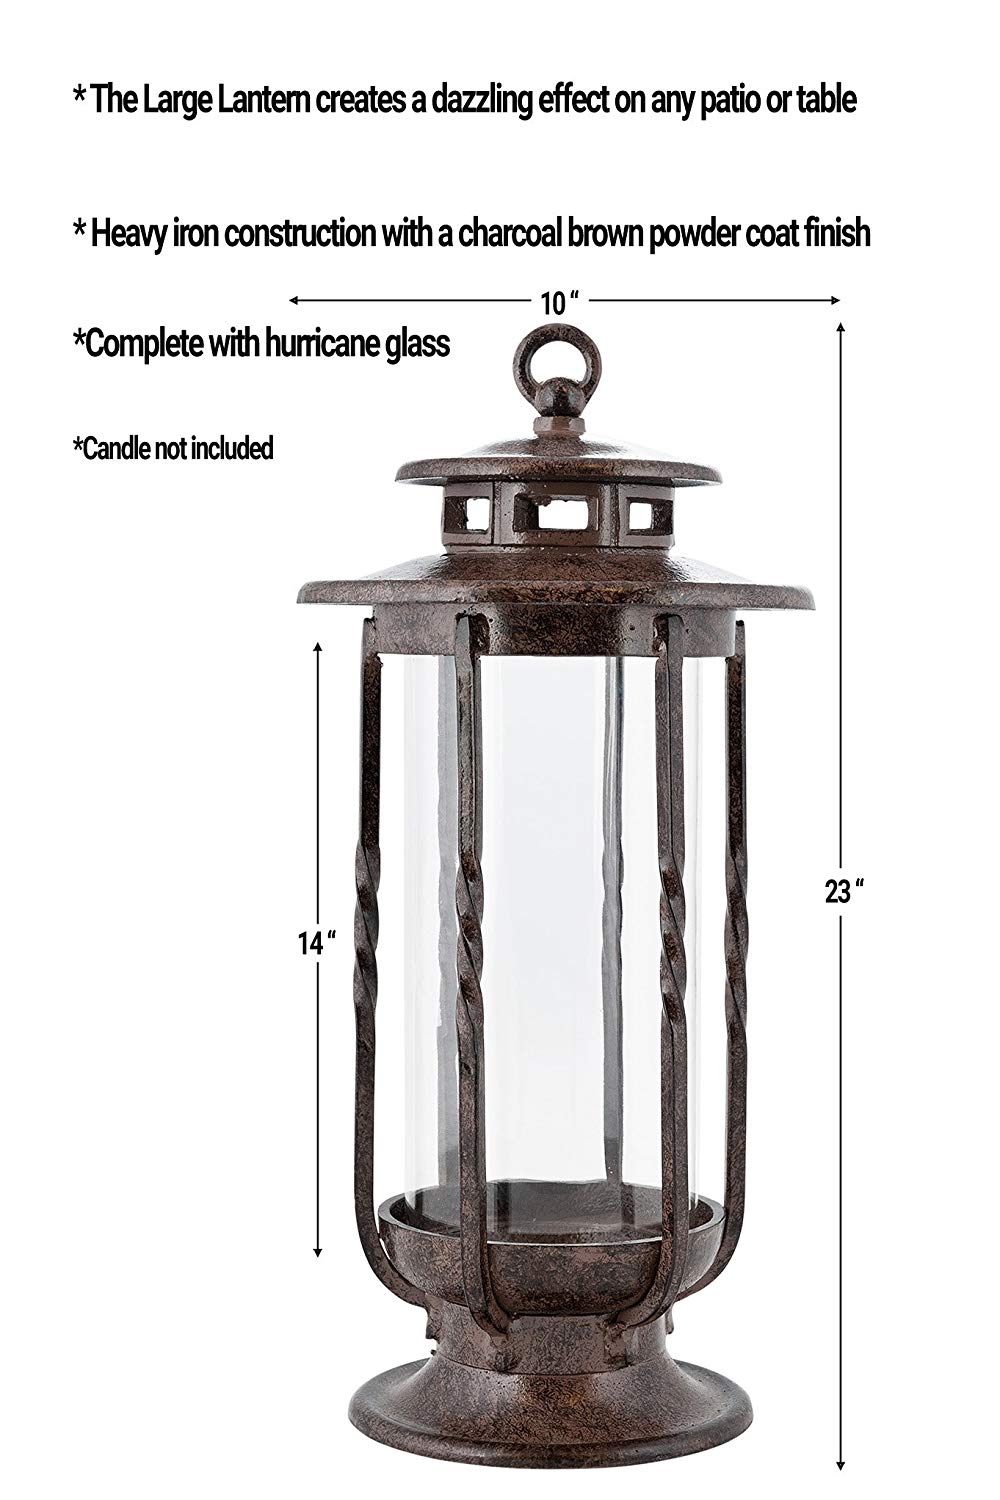 H Potter Large Decorative Hurricane Lantern Glass Candle Holder, Cast Iron, Rustic Indoor & Outdoor Light with Powder Coat Finish Centerpiece for Home, Wedding & Farmhouse Decor